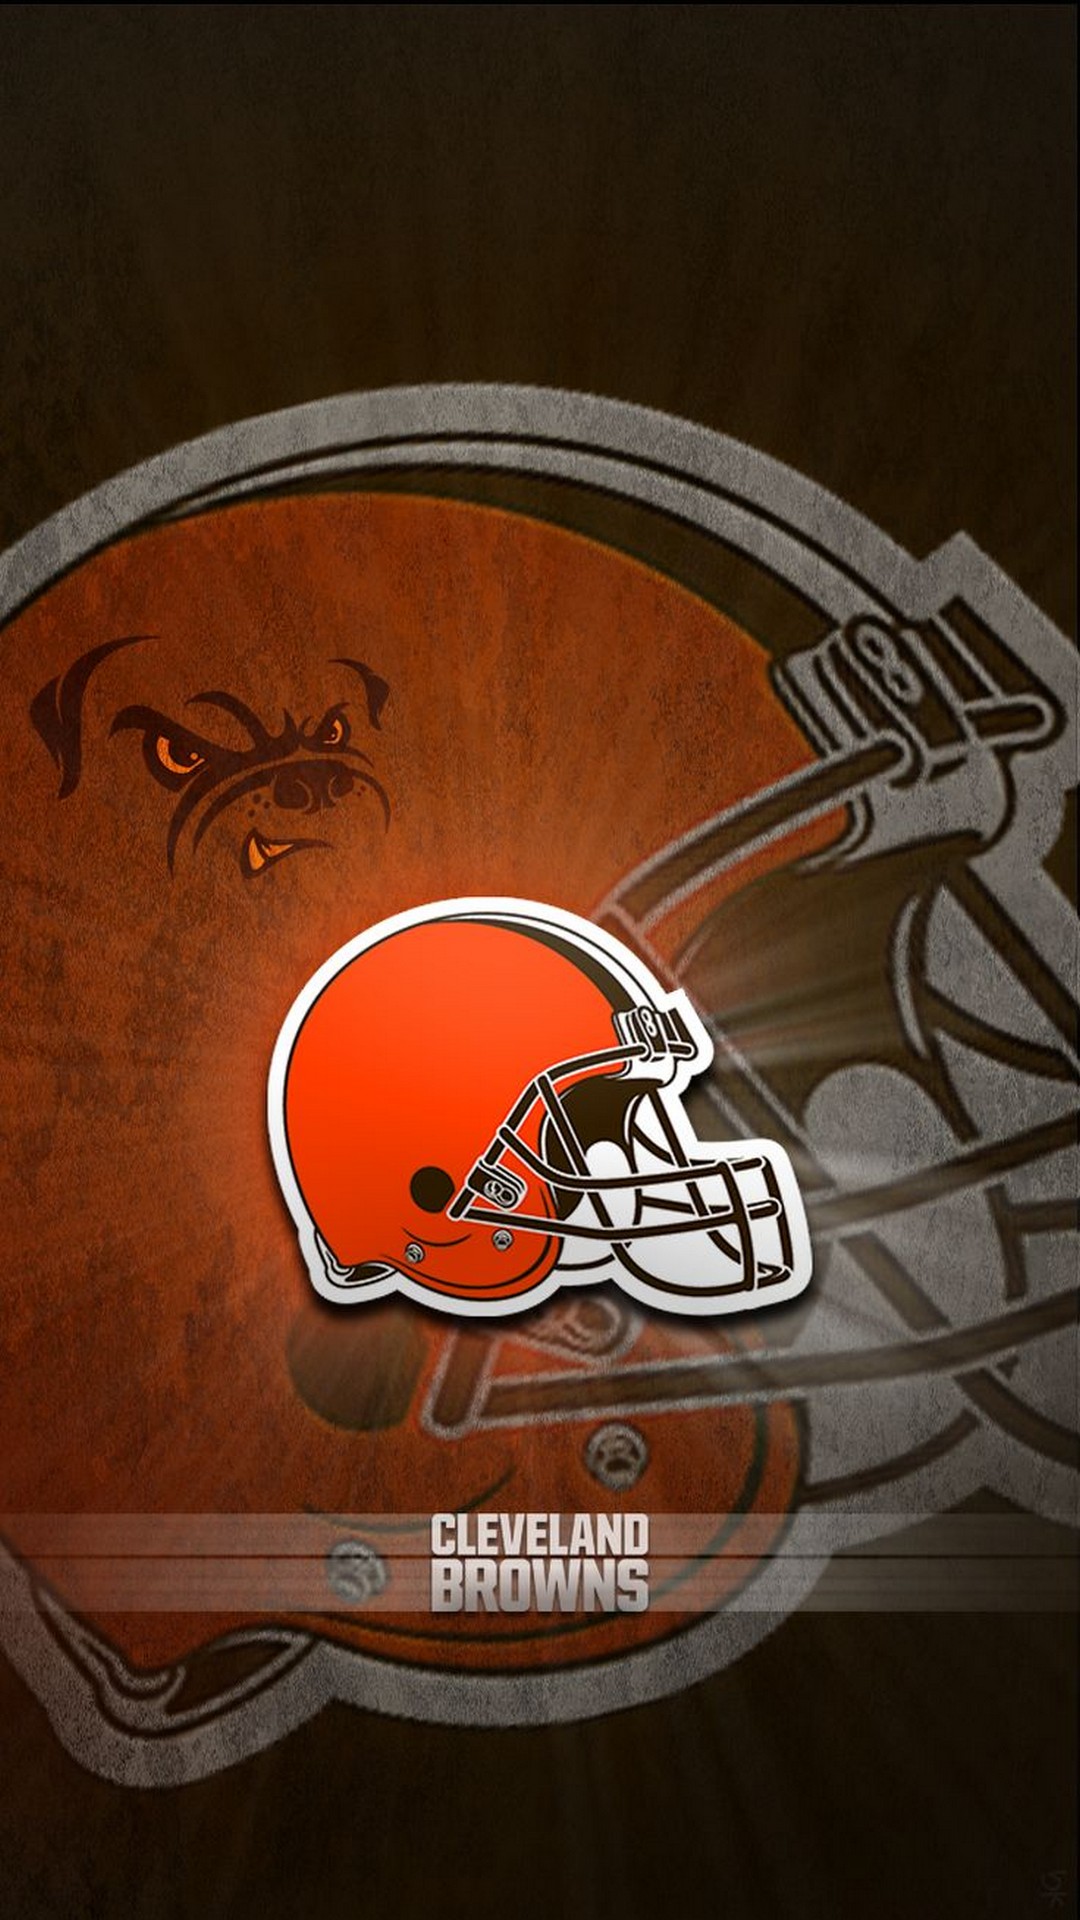 Cleveland Browns iPhone Wallpaper Design with high-resolution 1080x1920 pixel. Download and set as wallpaper for Apple iPhone X, XS Max, XR, 8, 7, 6, SE, iPad, Android